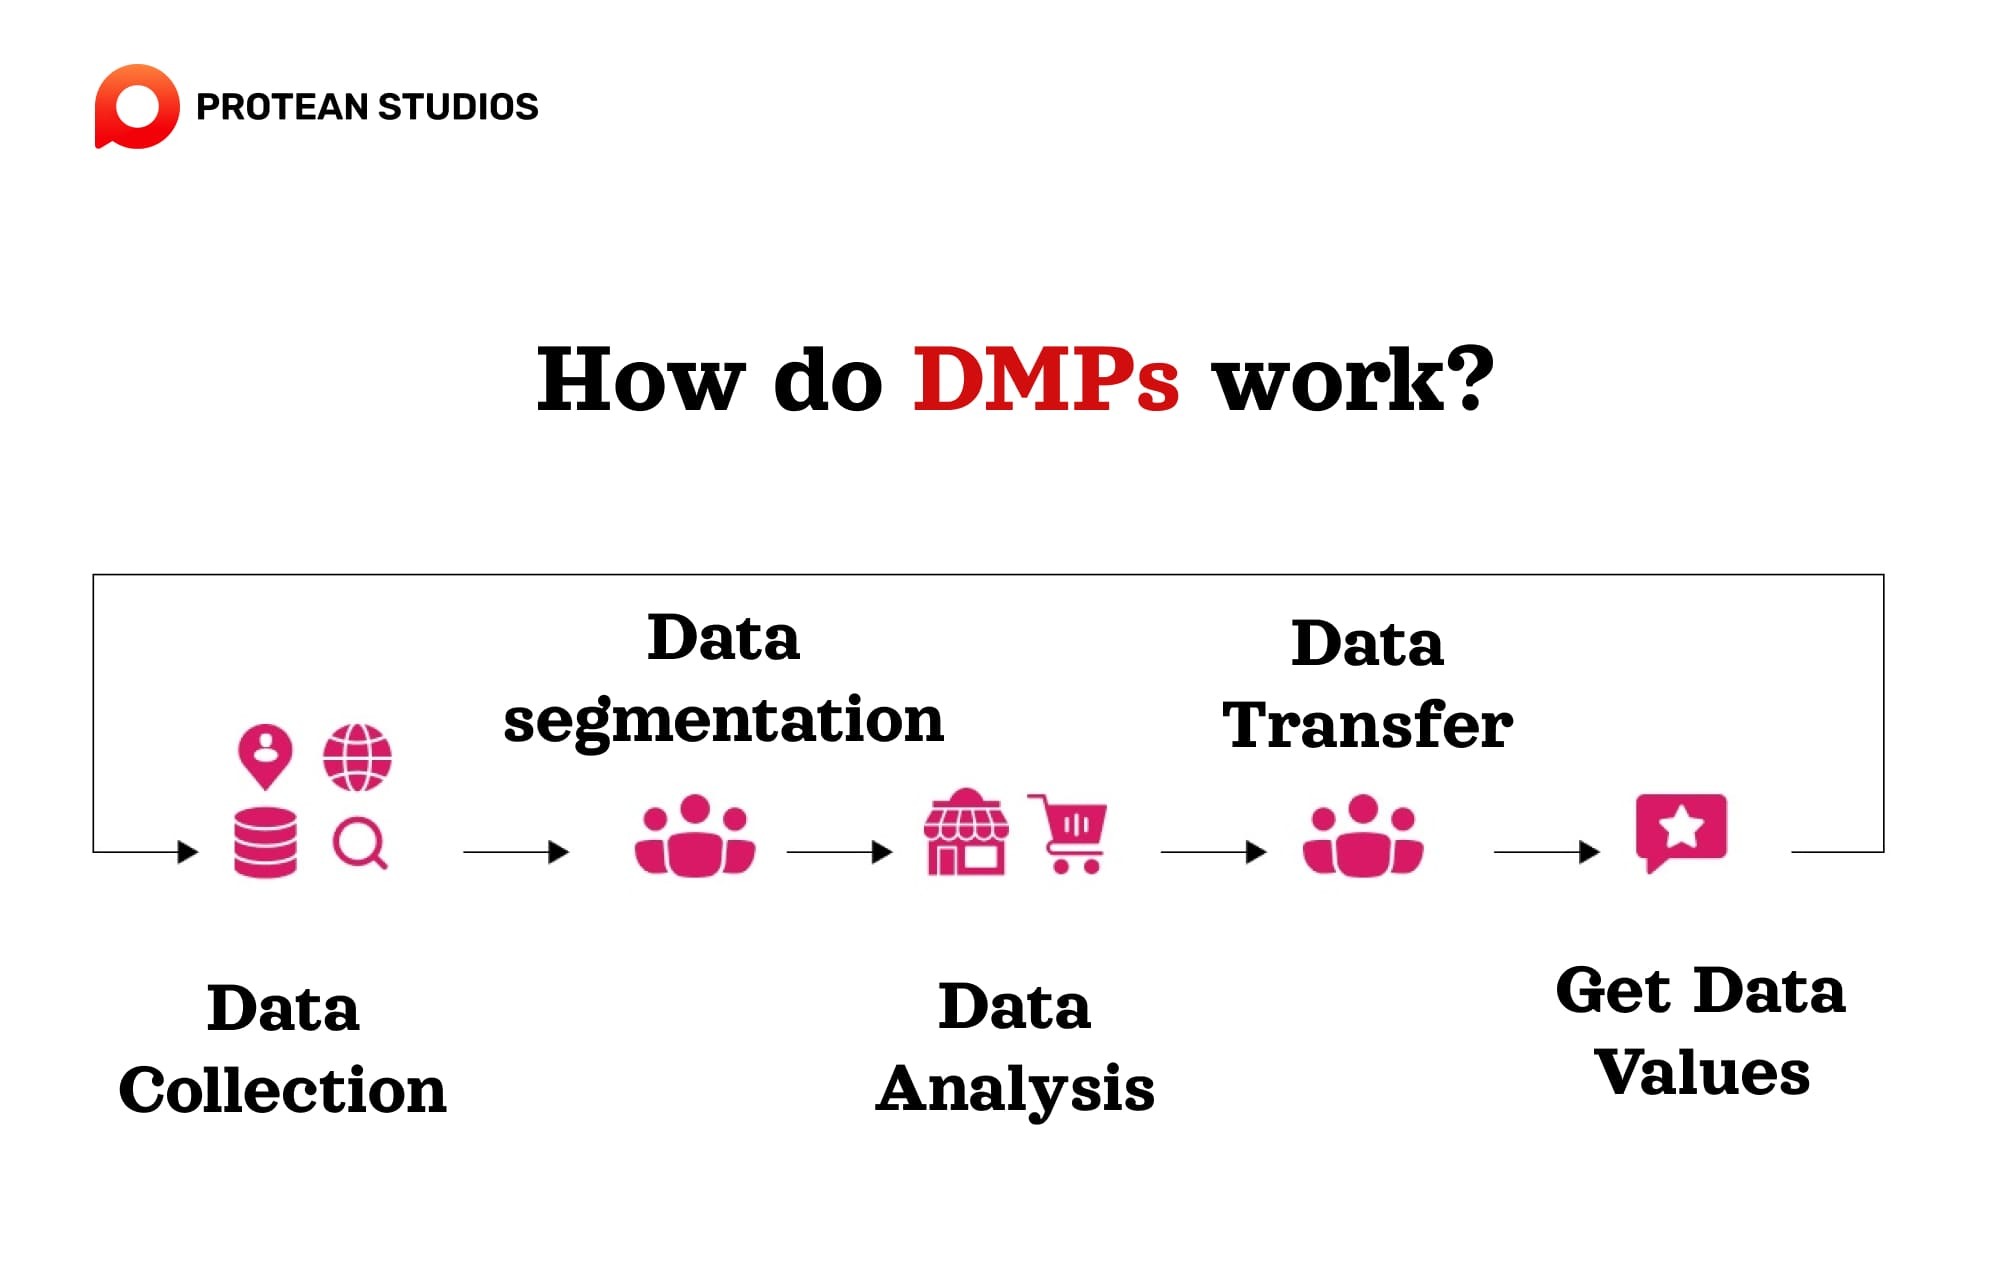 DMPs have to segment the collected data